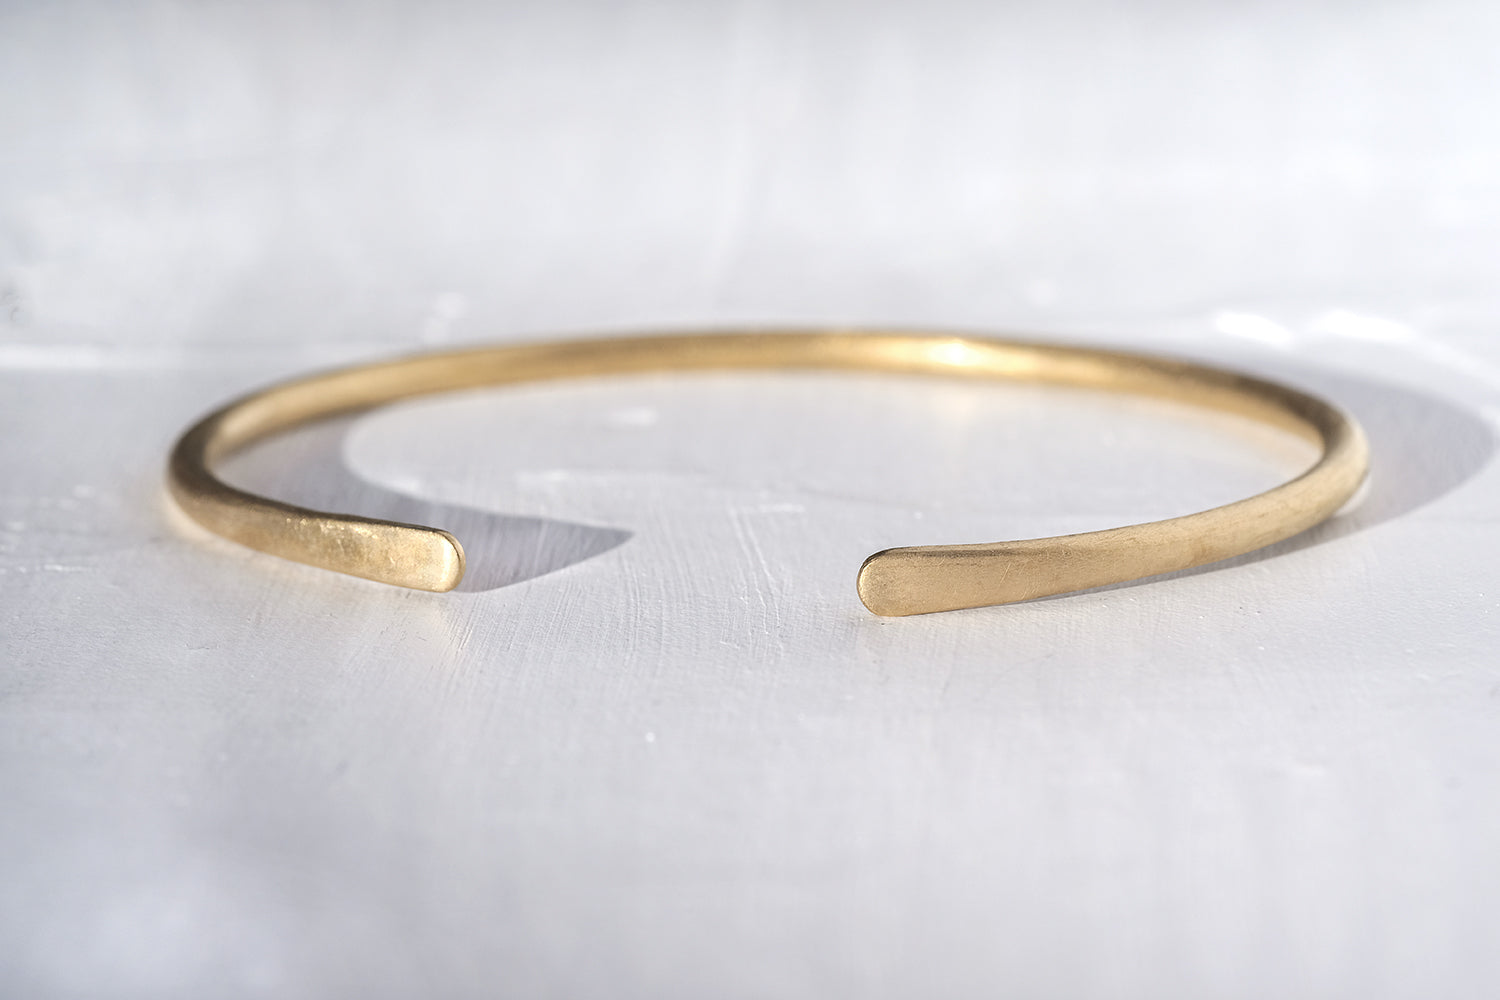 Gold Bracelet For Men - Thin And Smooth 